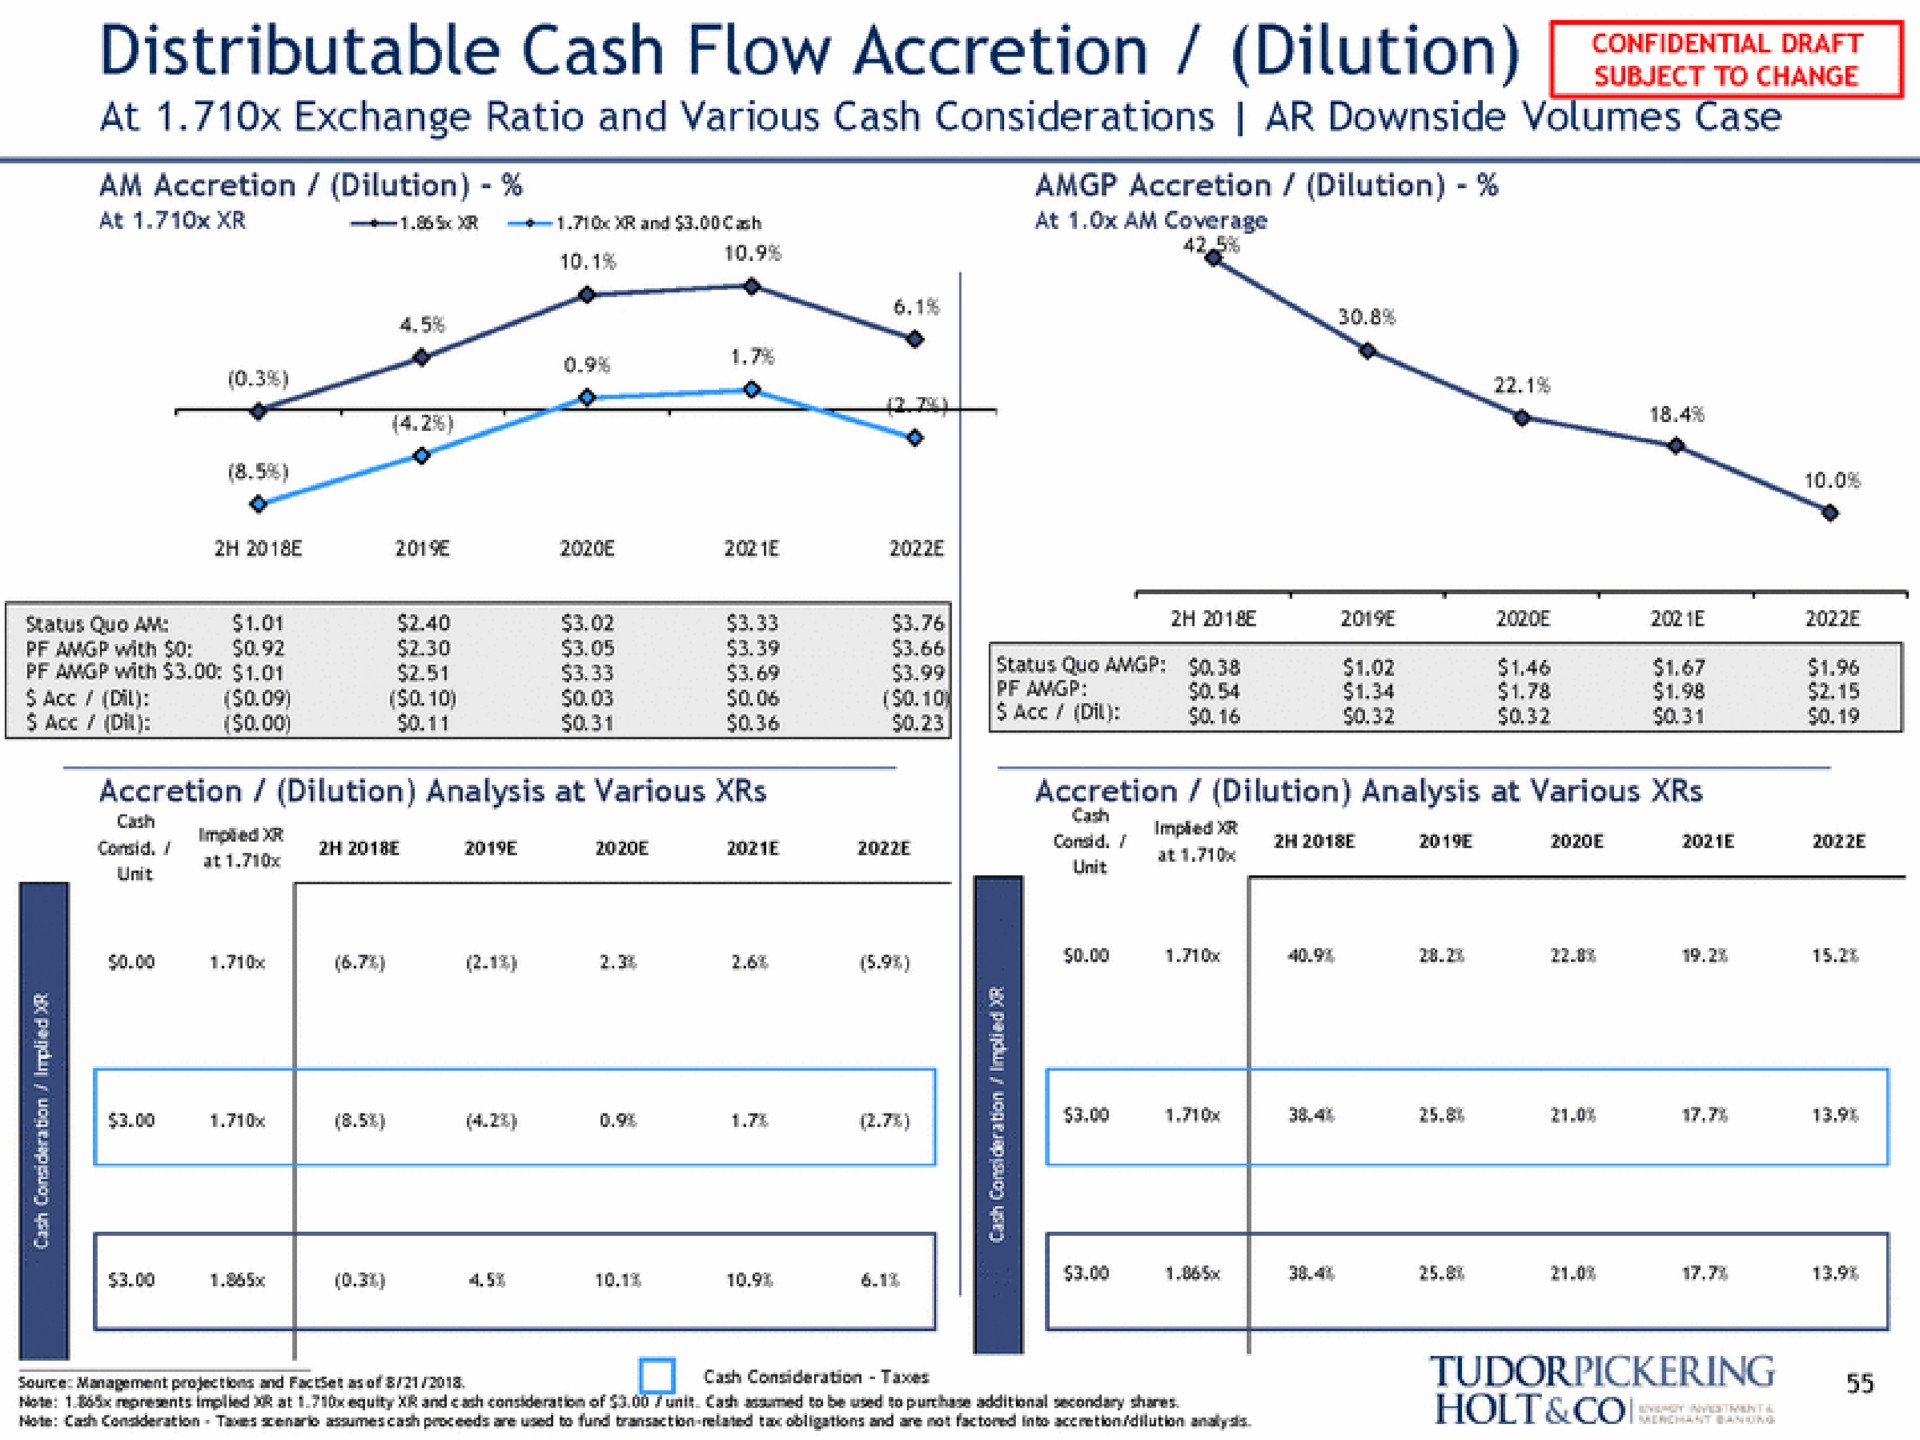 distributable cash flow accretion dilution at exchange ratio and various cash considerations downside volumes case | Tudor, Pickering, Holt & Co